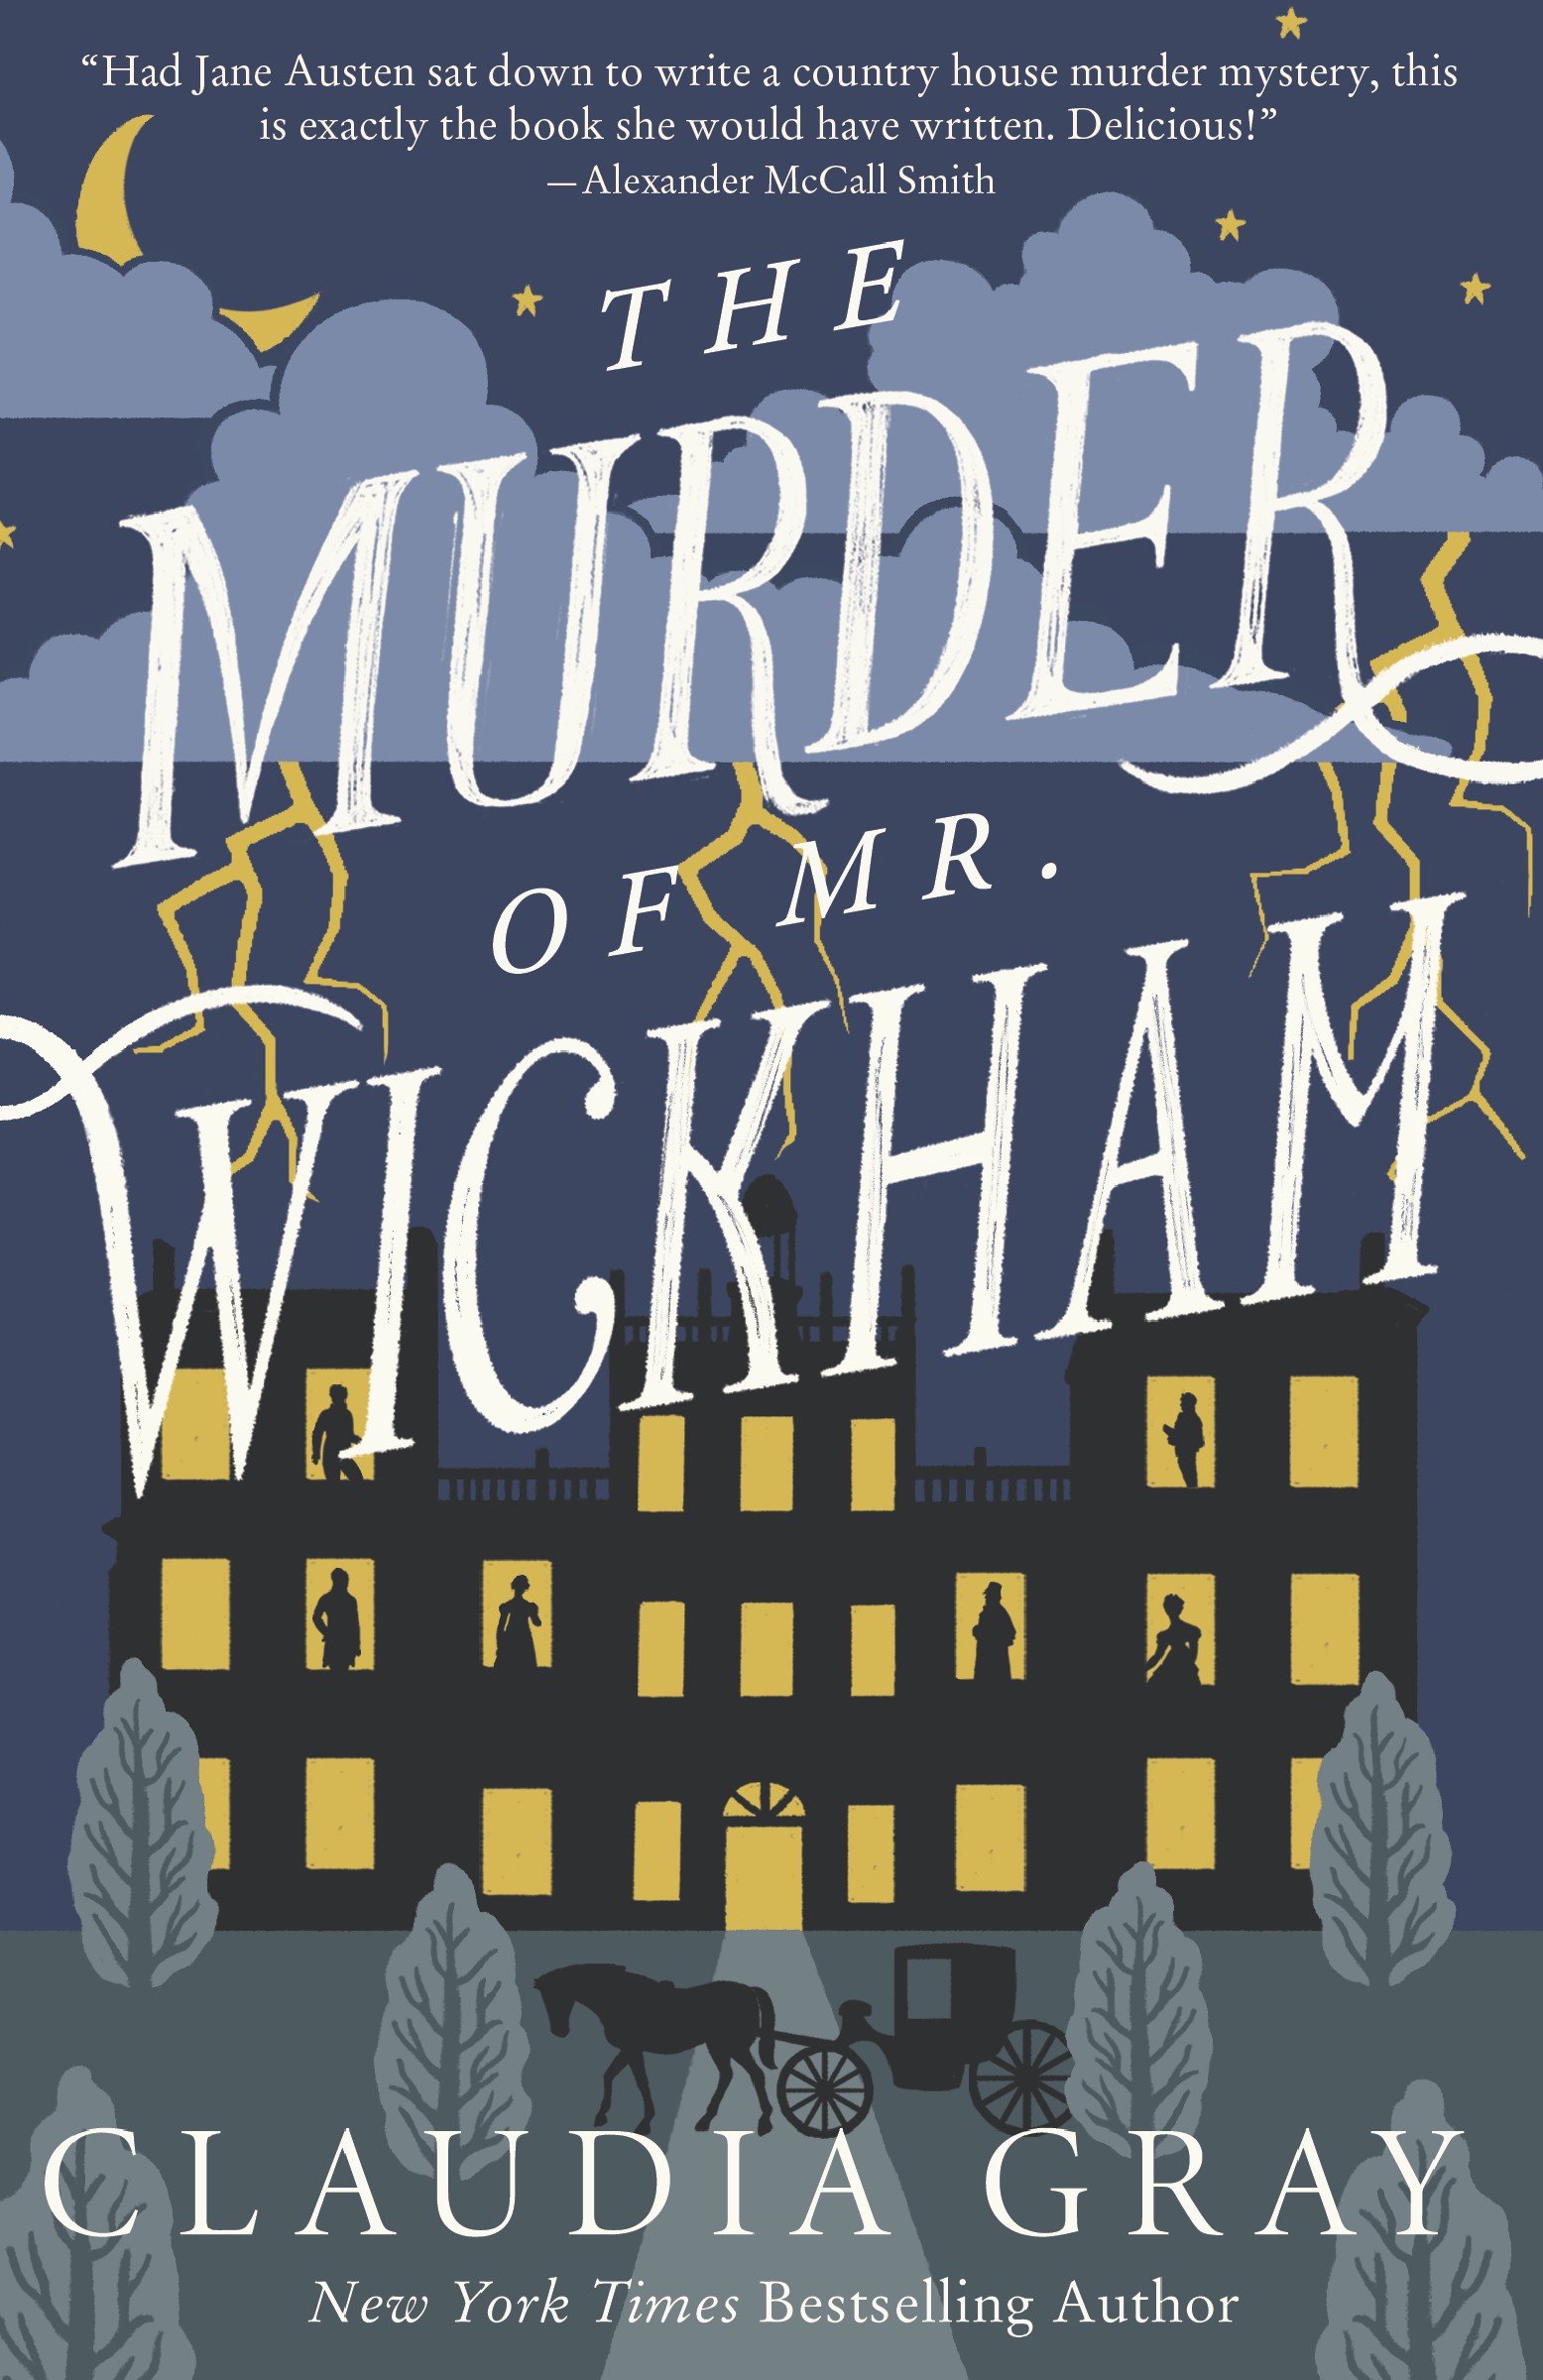 The Murder of Mr. Wickham by Clsudia Grat 2022